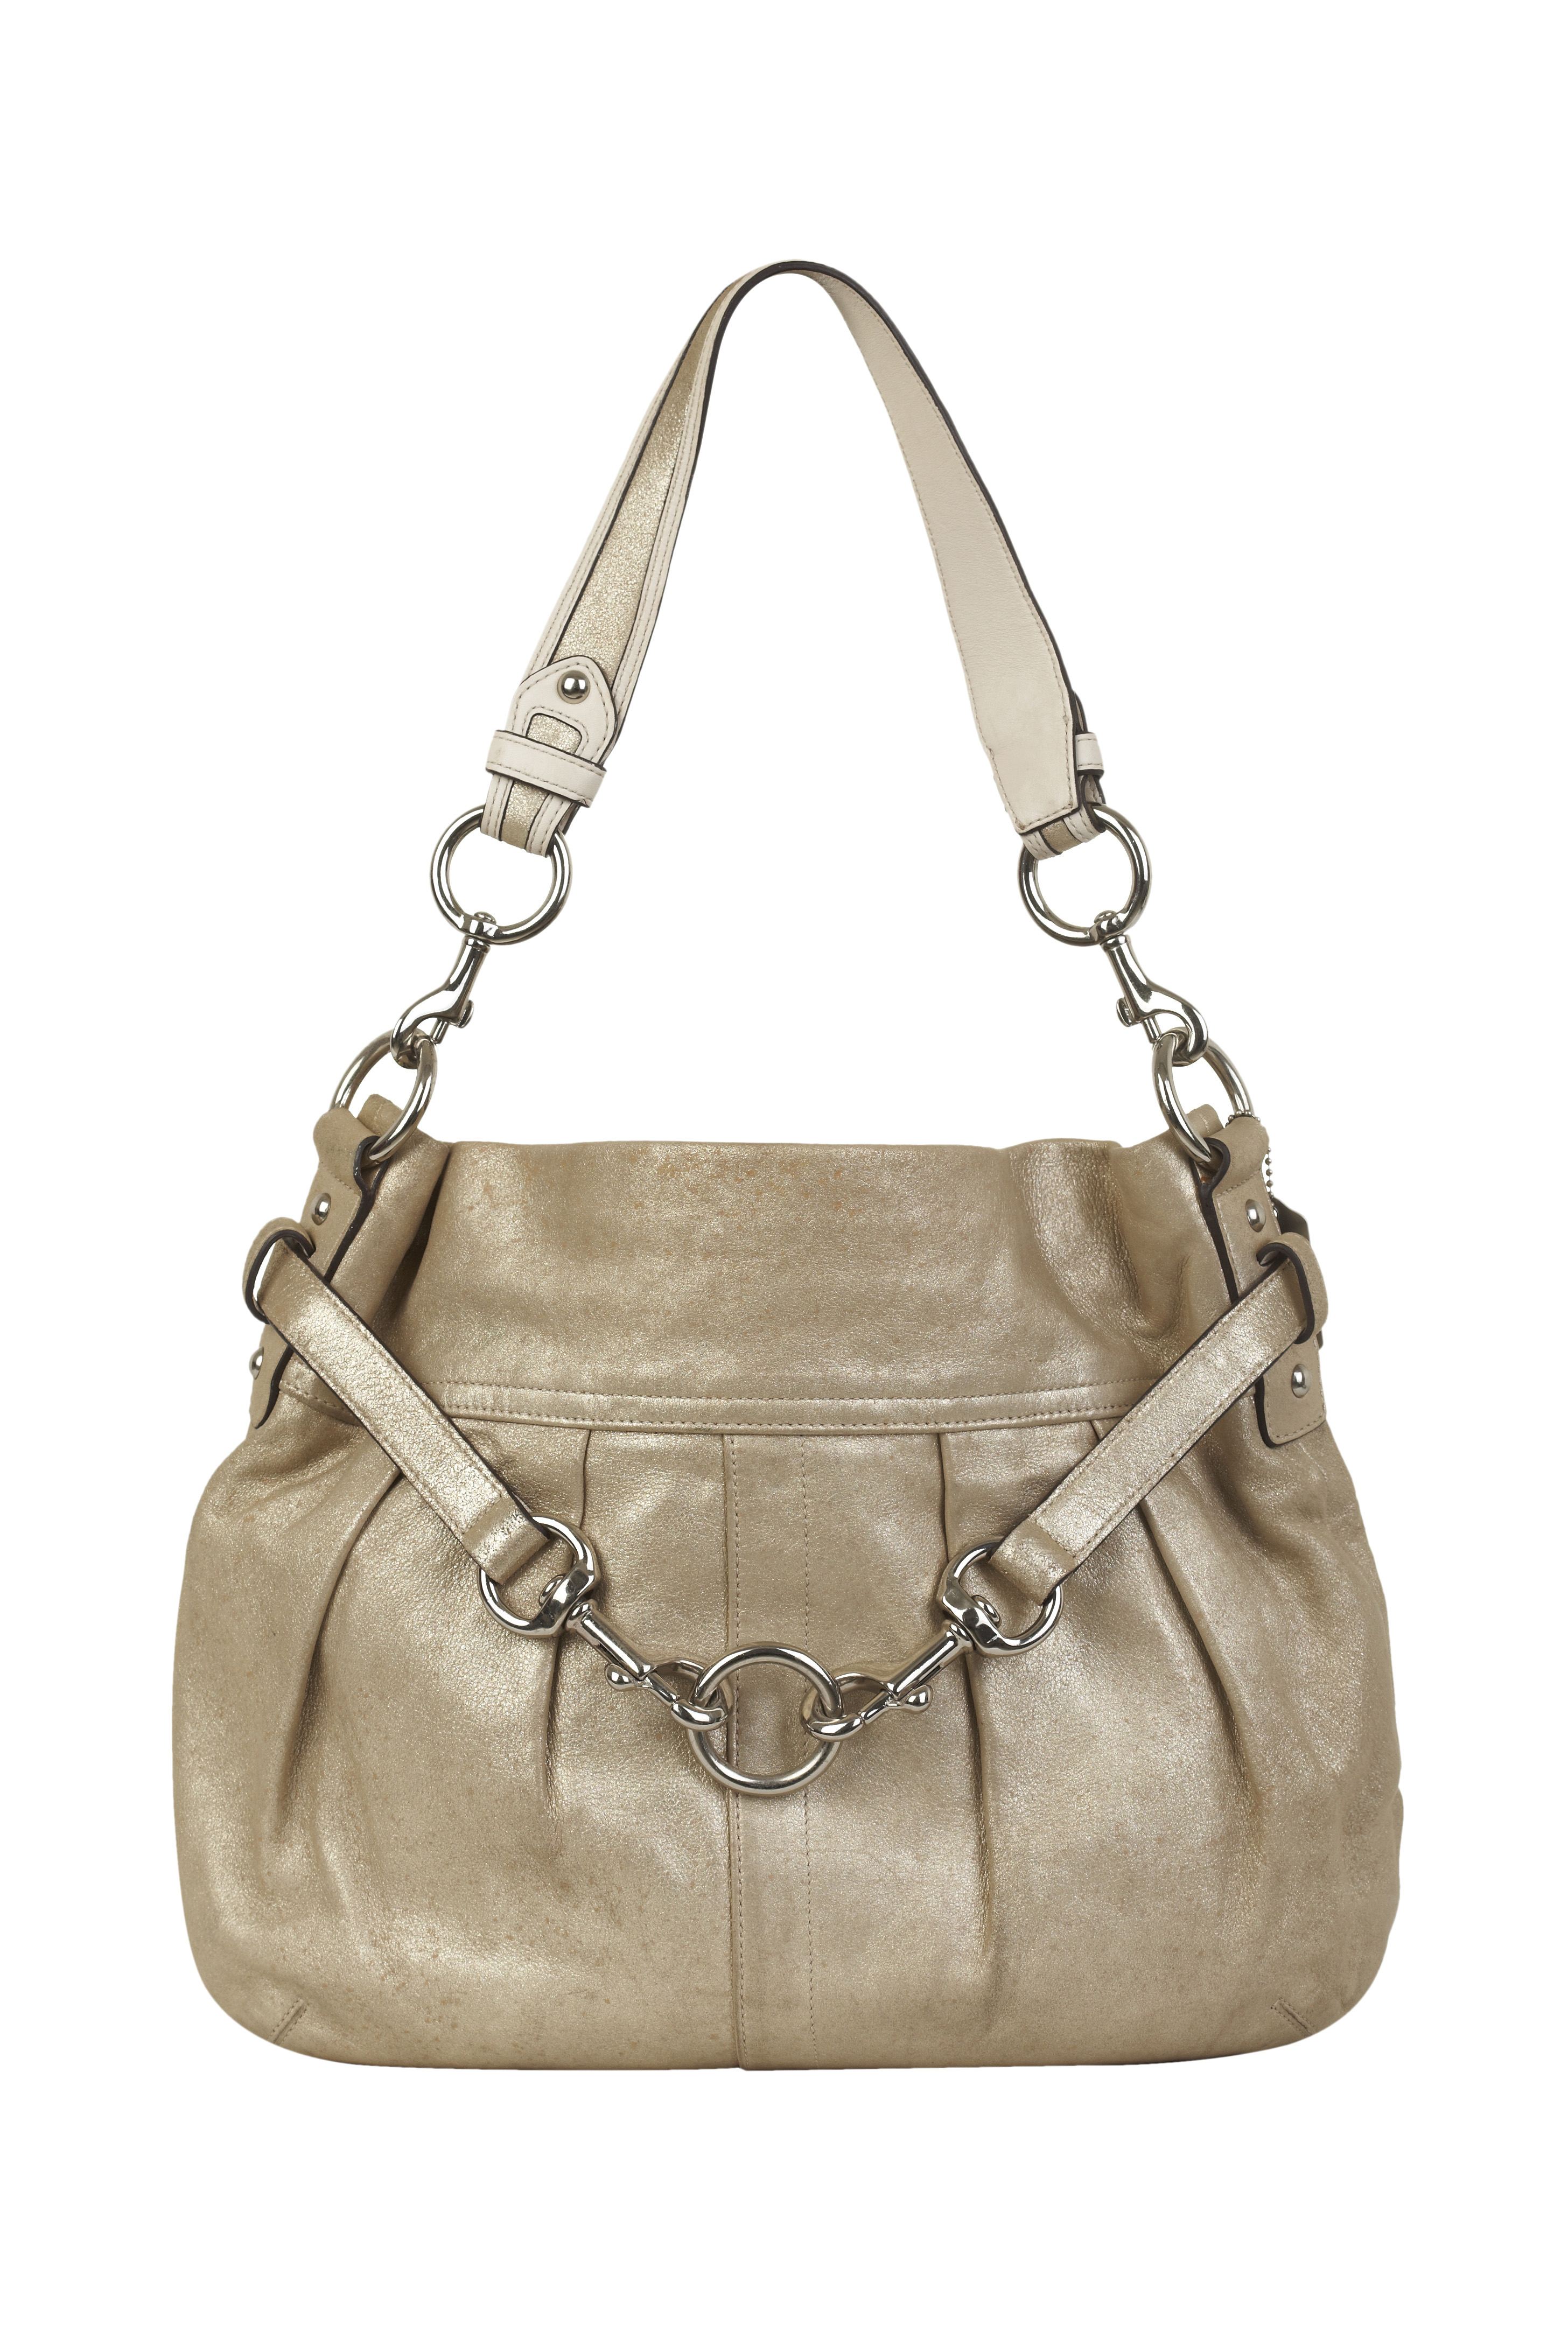 Coach champagne leather shoulder bag | Curate8